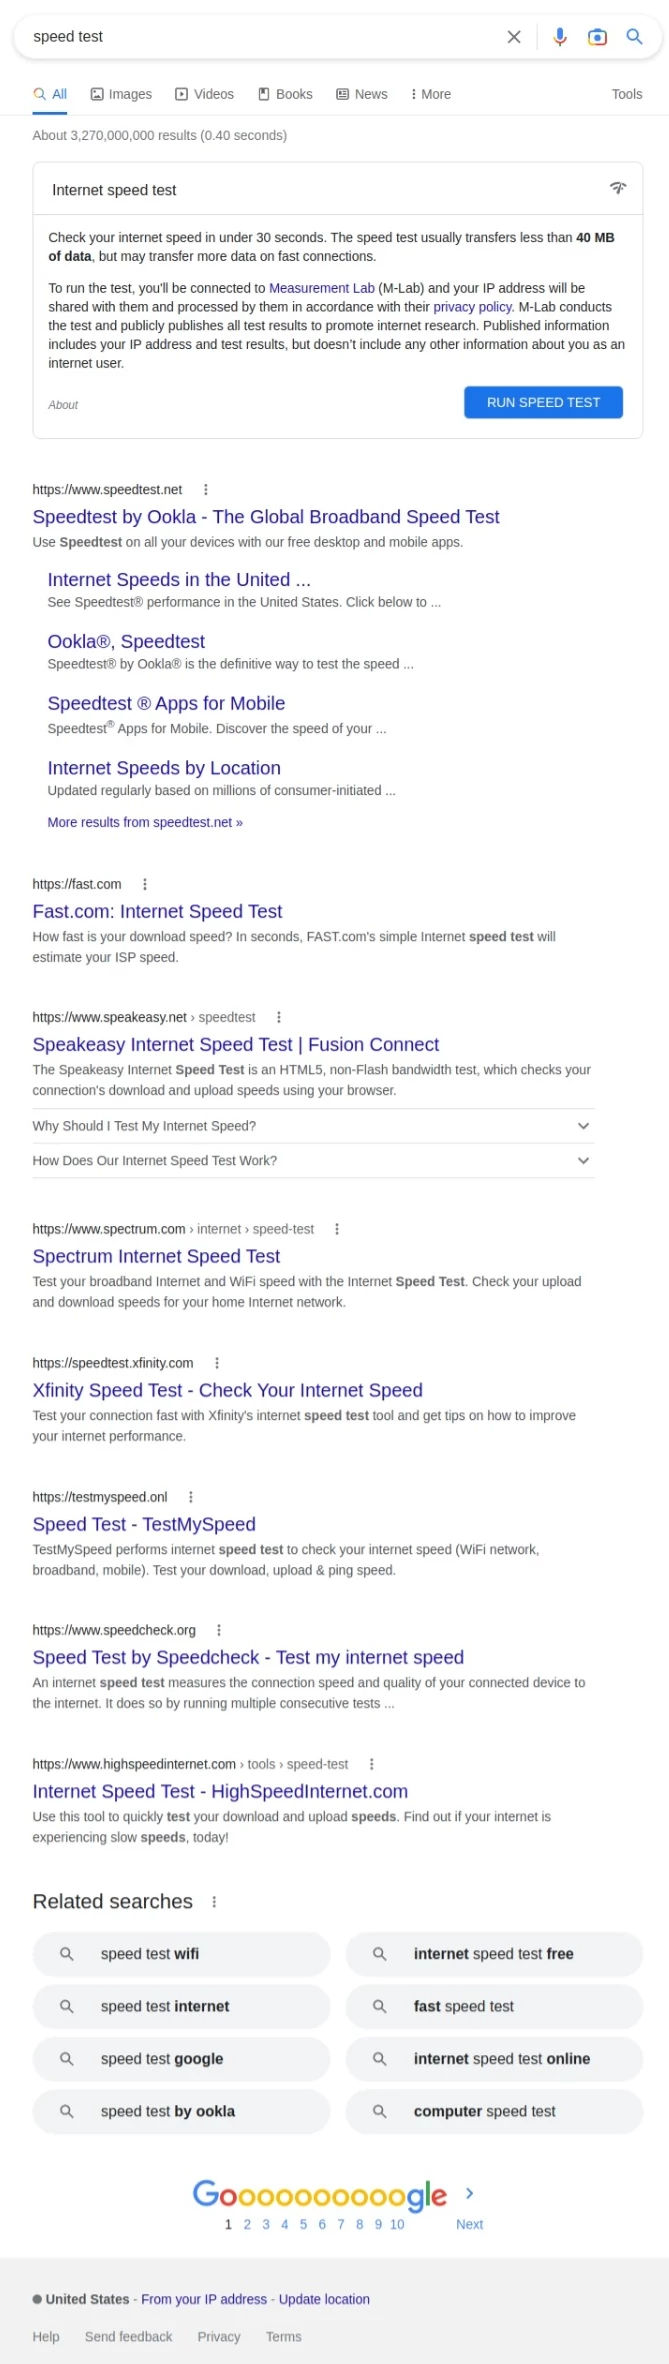 Google's result page when searching for speed test (January 10)